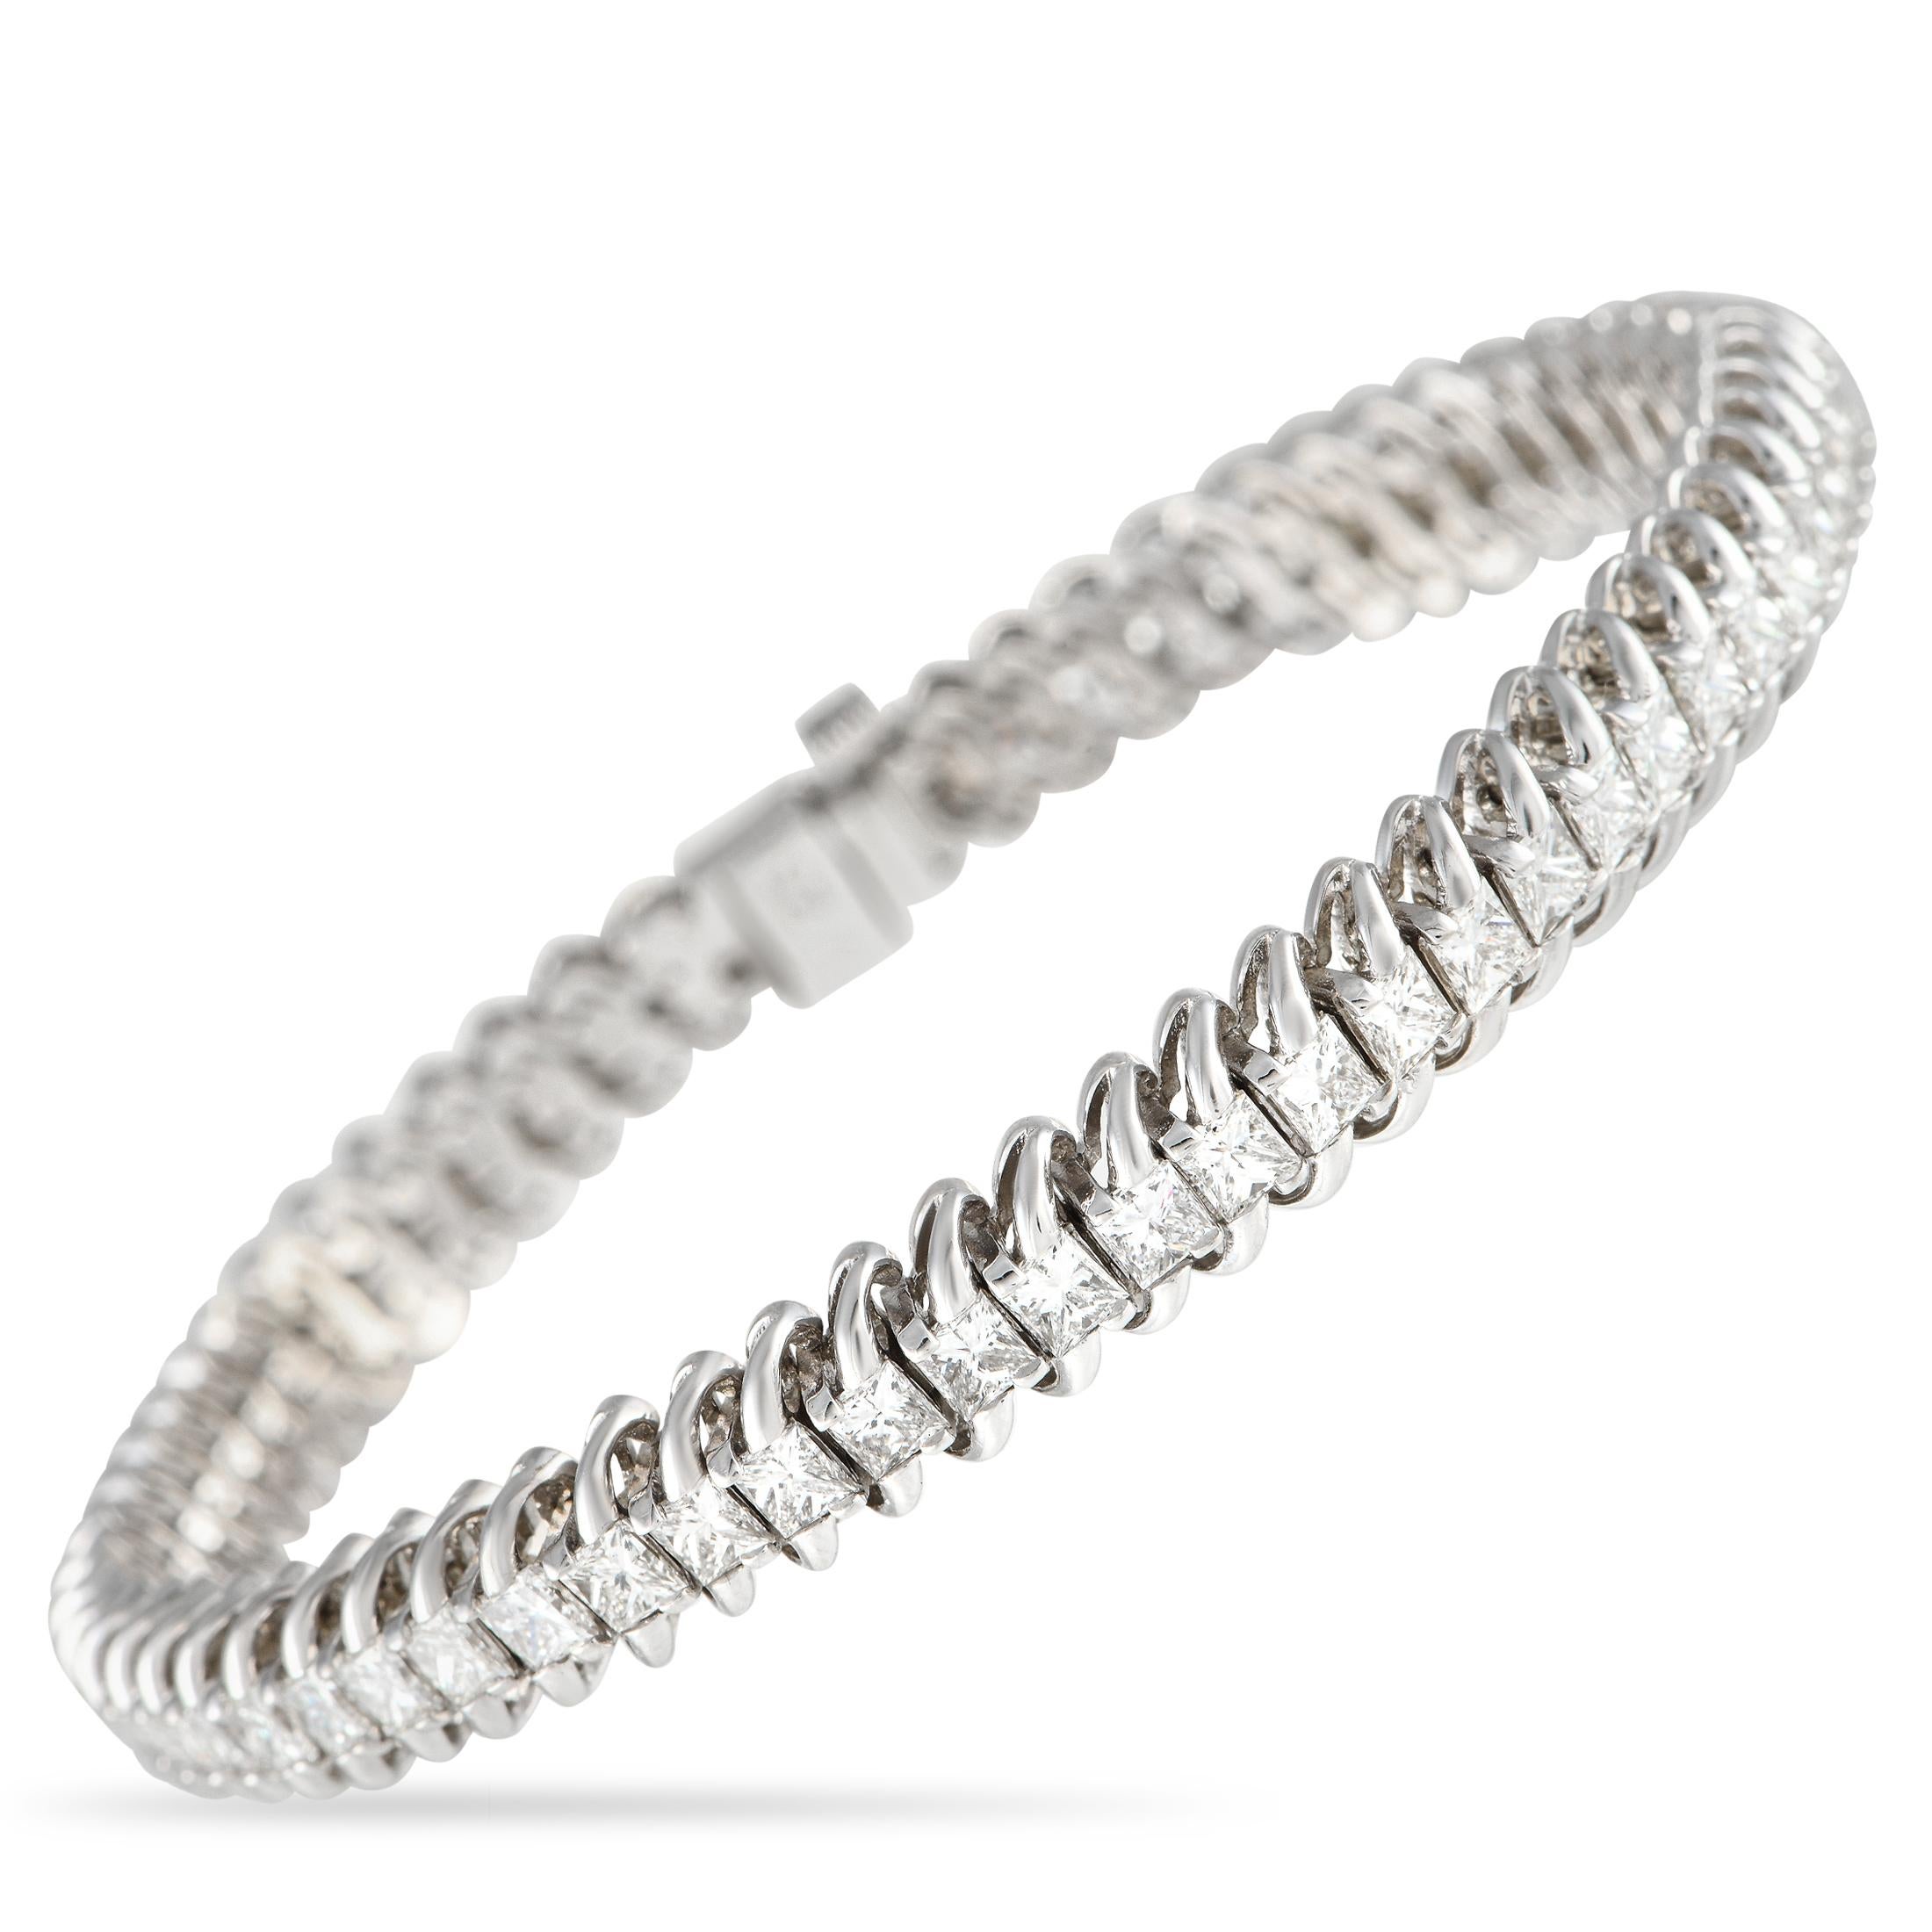 14K White Gold 7.0ct Diamond Bracelet In Excellent Condition For Sale In Southampton, PA